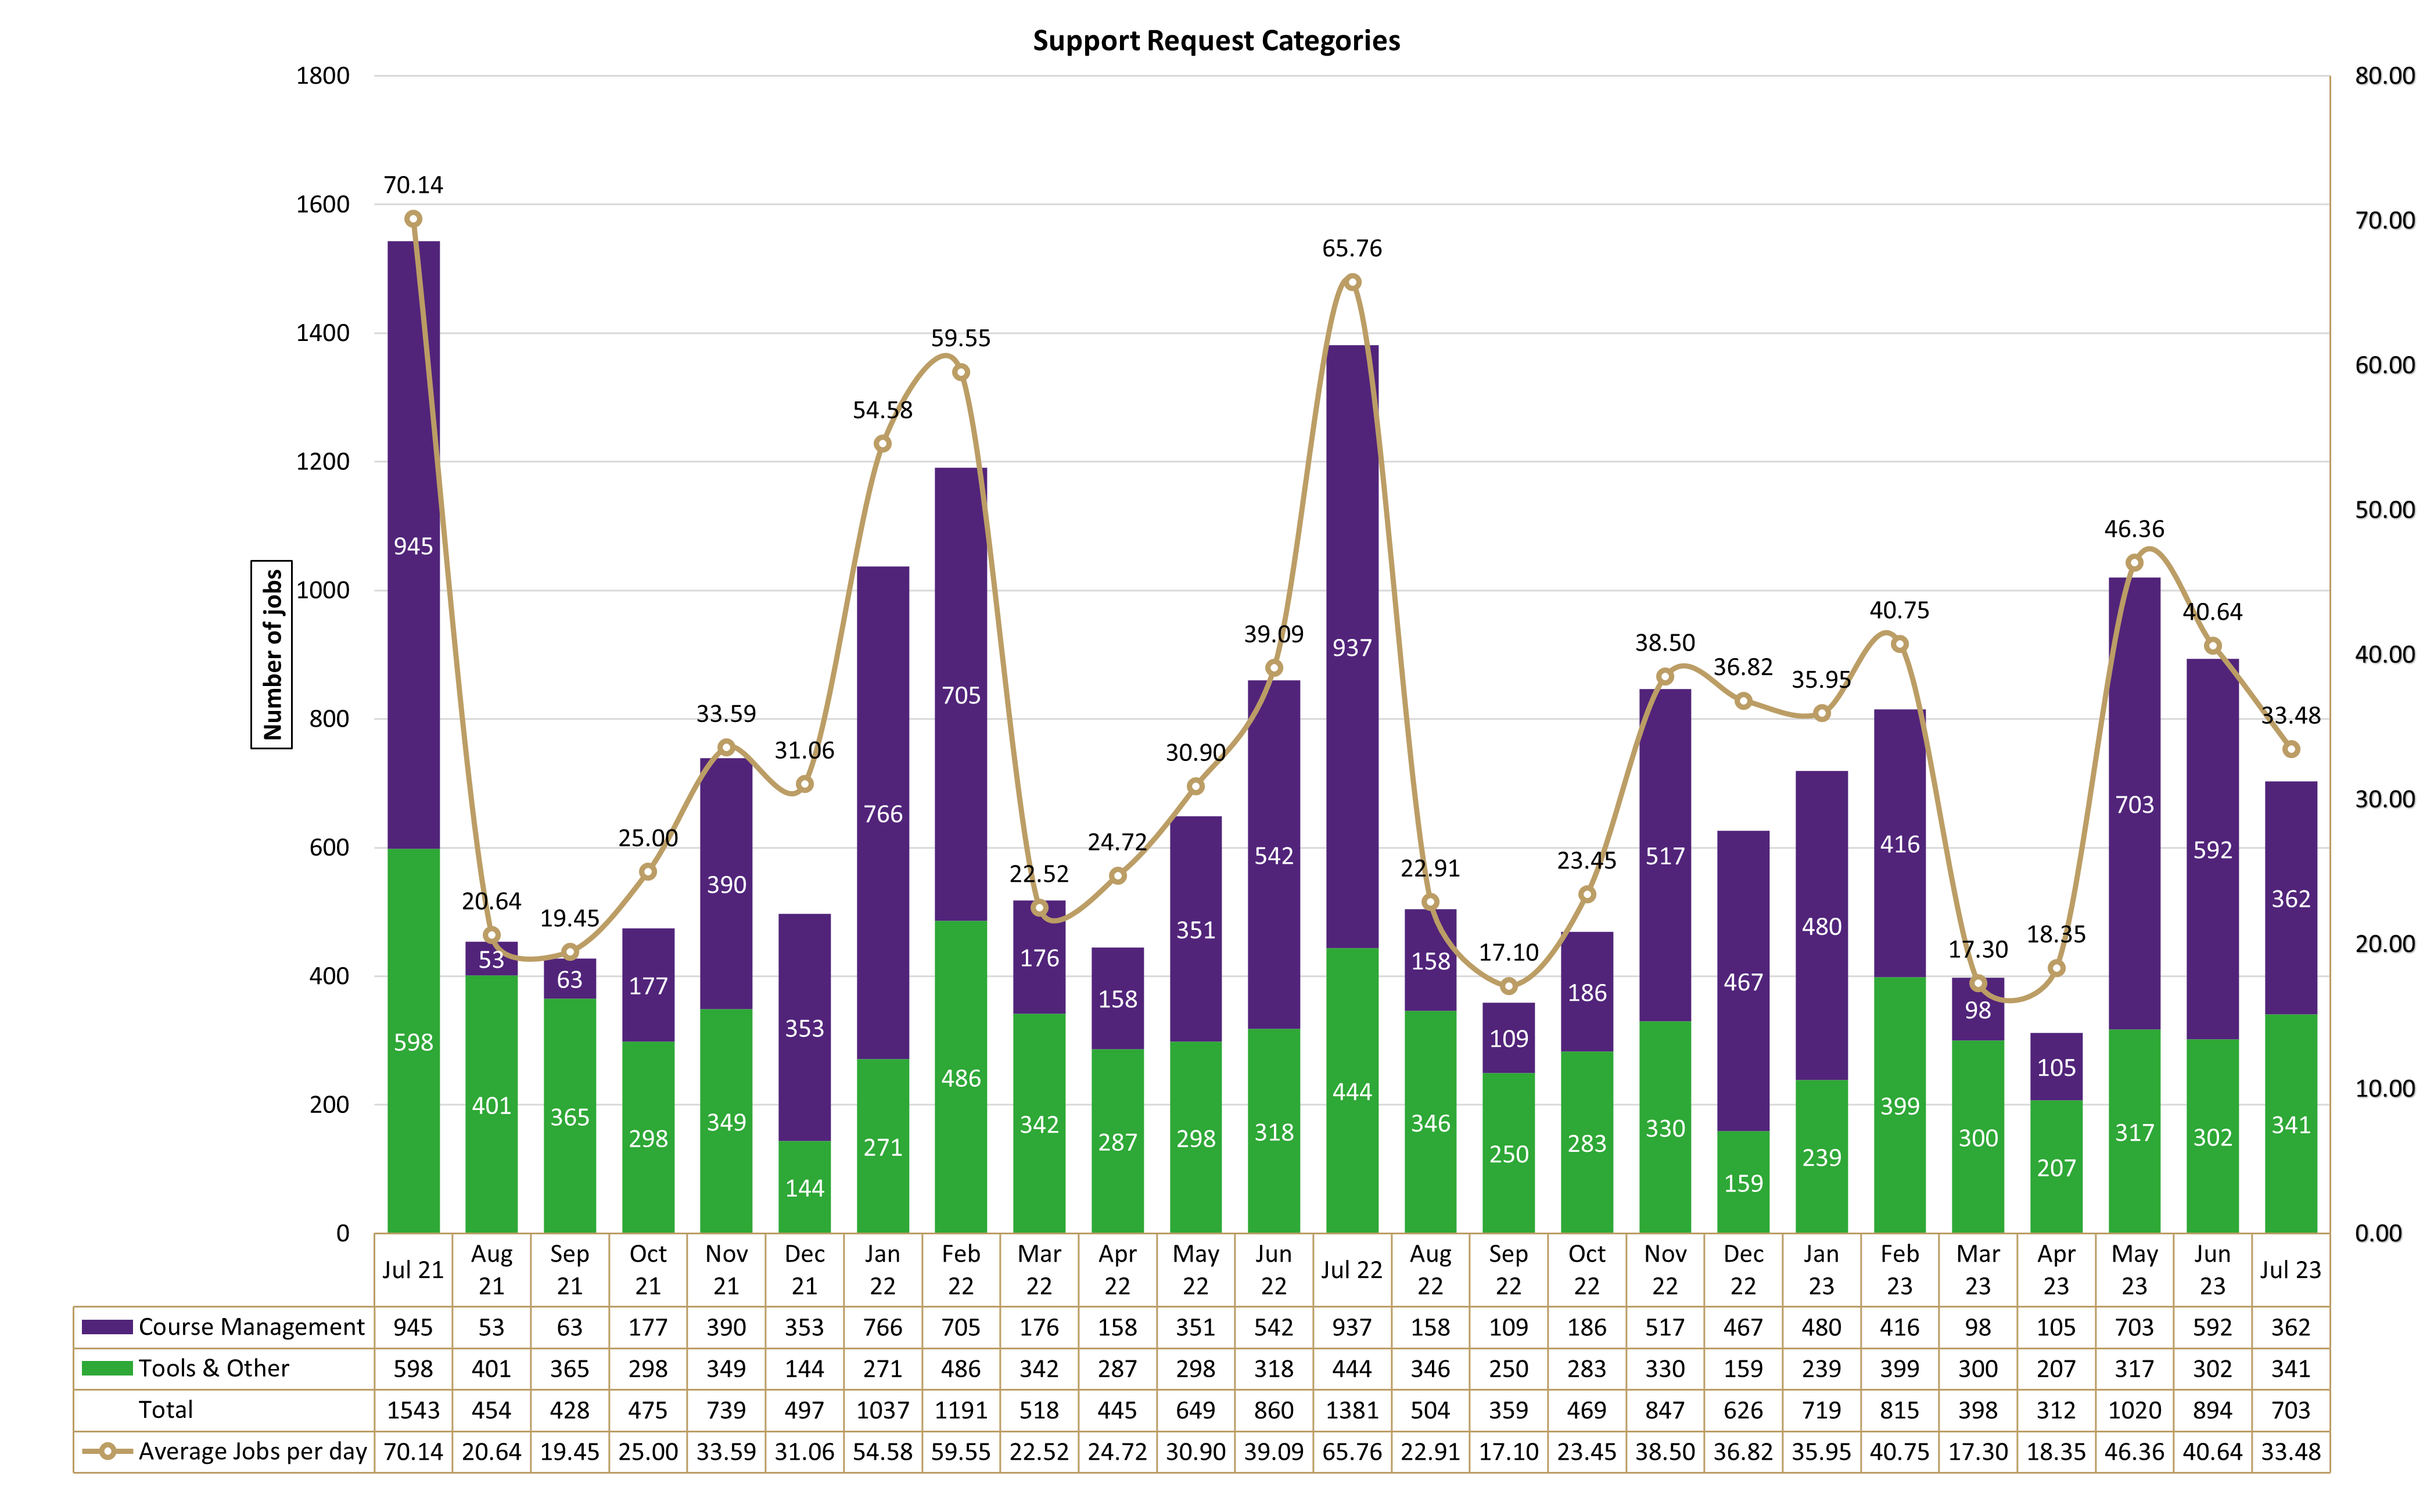 Chart of Support Request Categories from July 2021 to July 2023